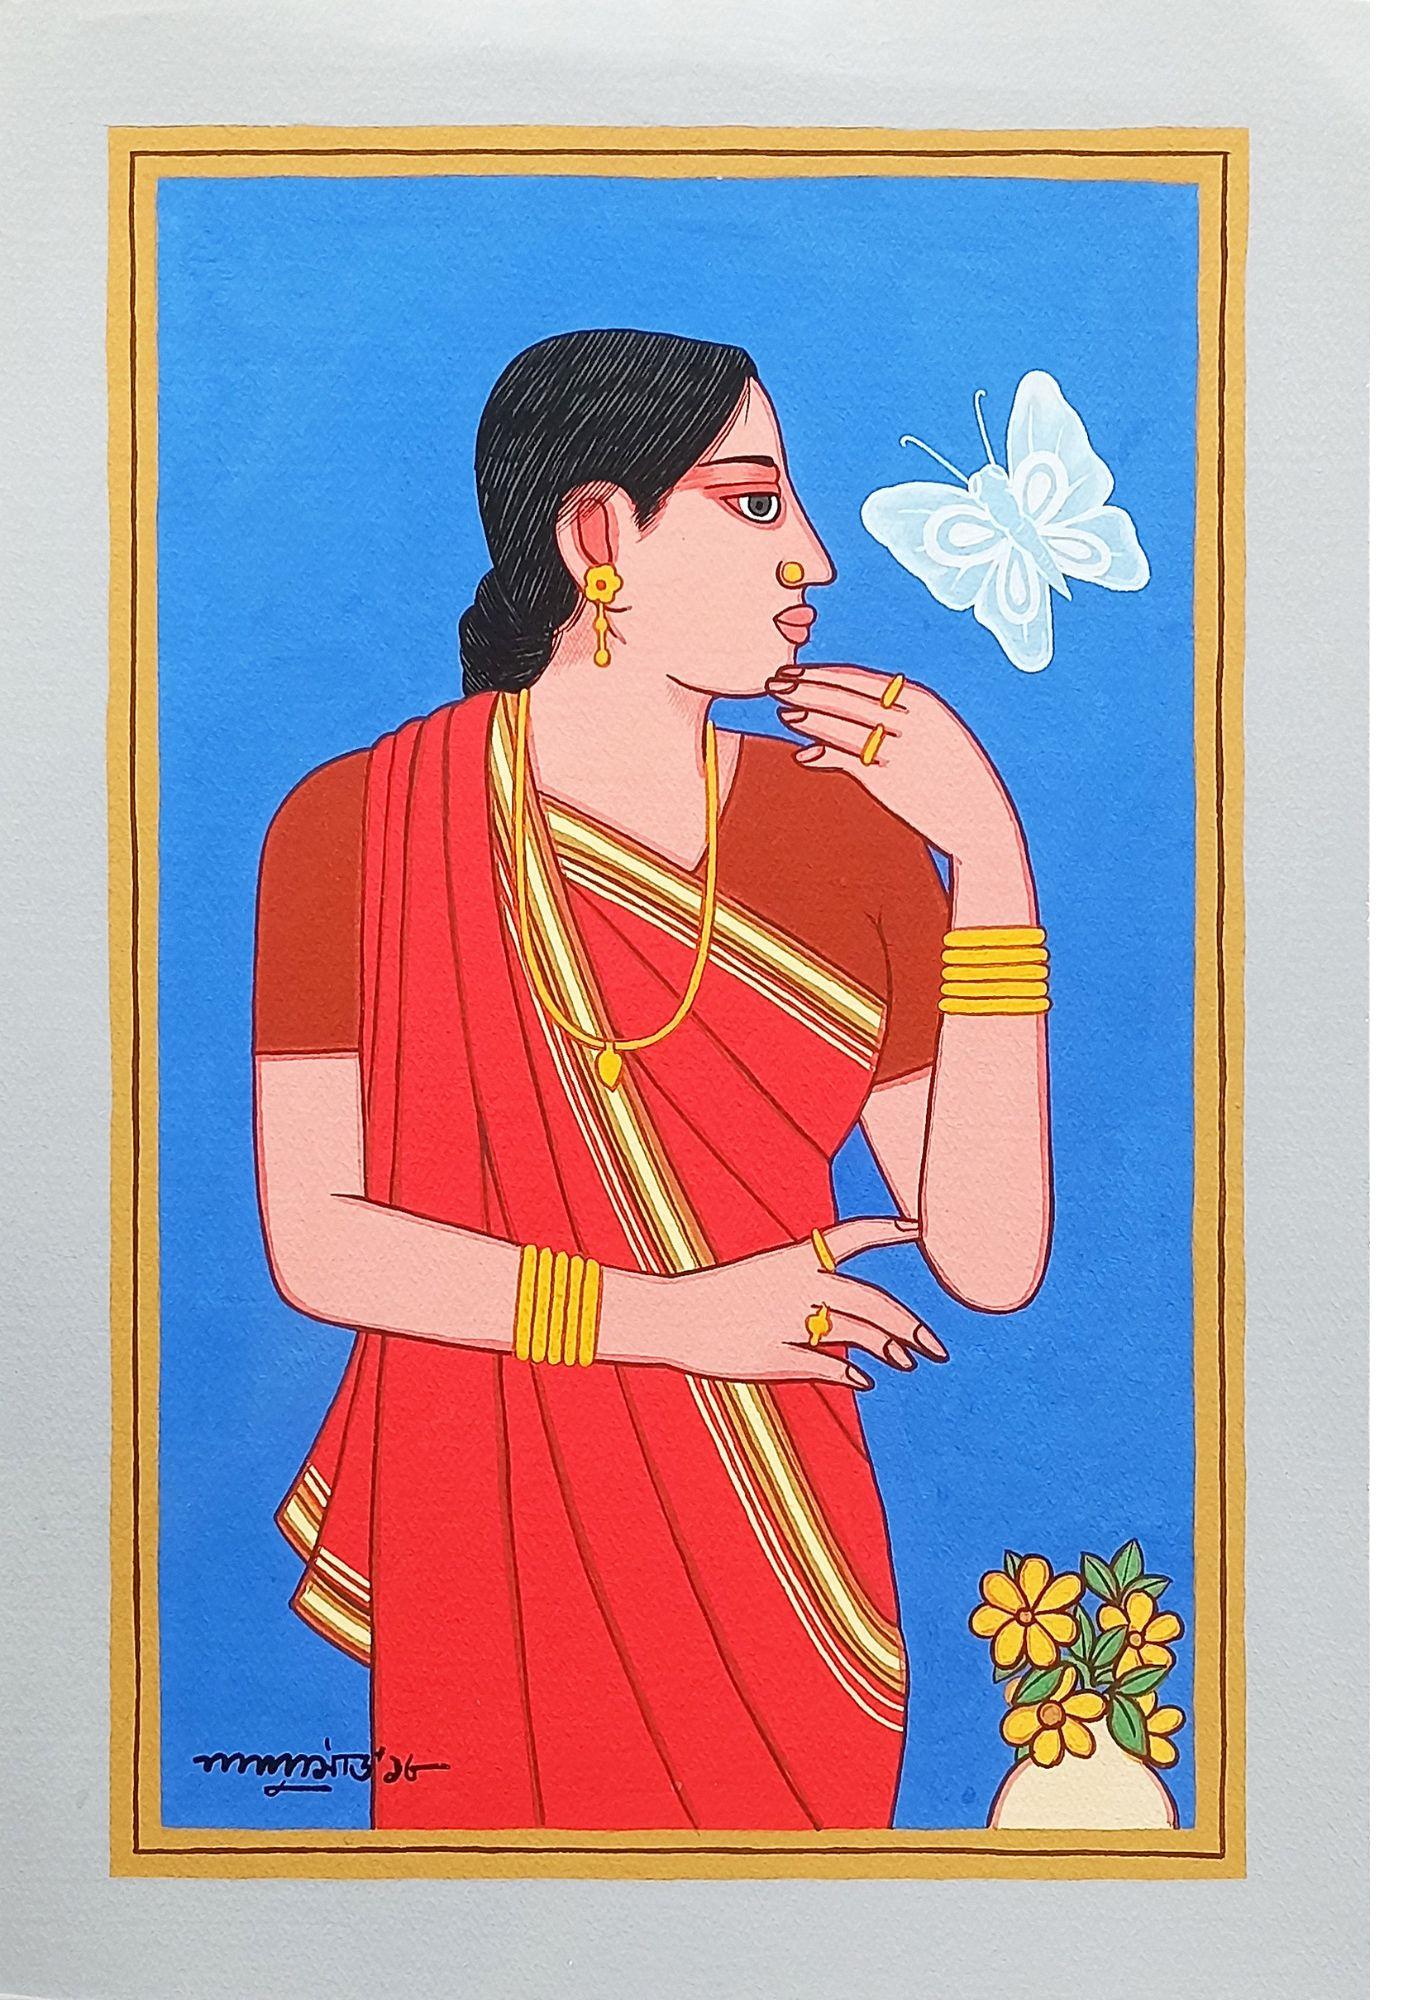 Lalu Prasad Shaw - Bibi - 
21 x 15 Inches
2021
Tempera on Board
( Framed & Delivered )

Style : Known widely for his highly stylized portraits of Bengali women and couples, Lalu Prasad Shaw’s works lay the most emphasis on his subject’s physical